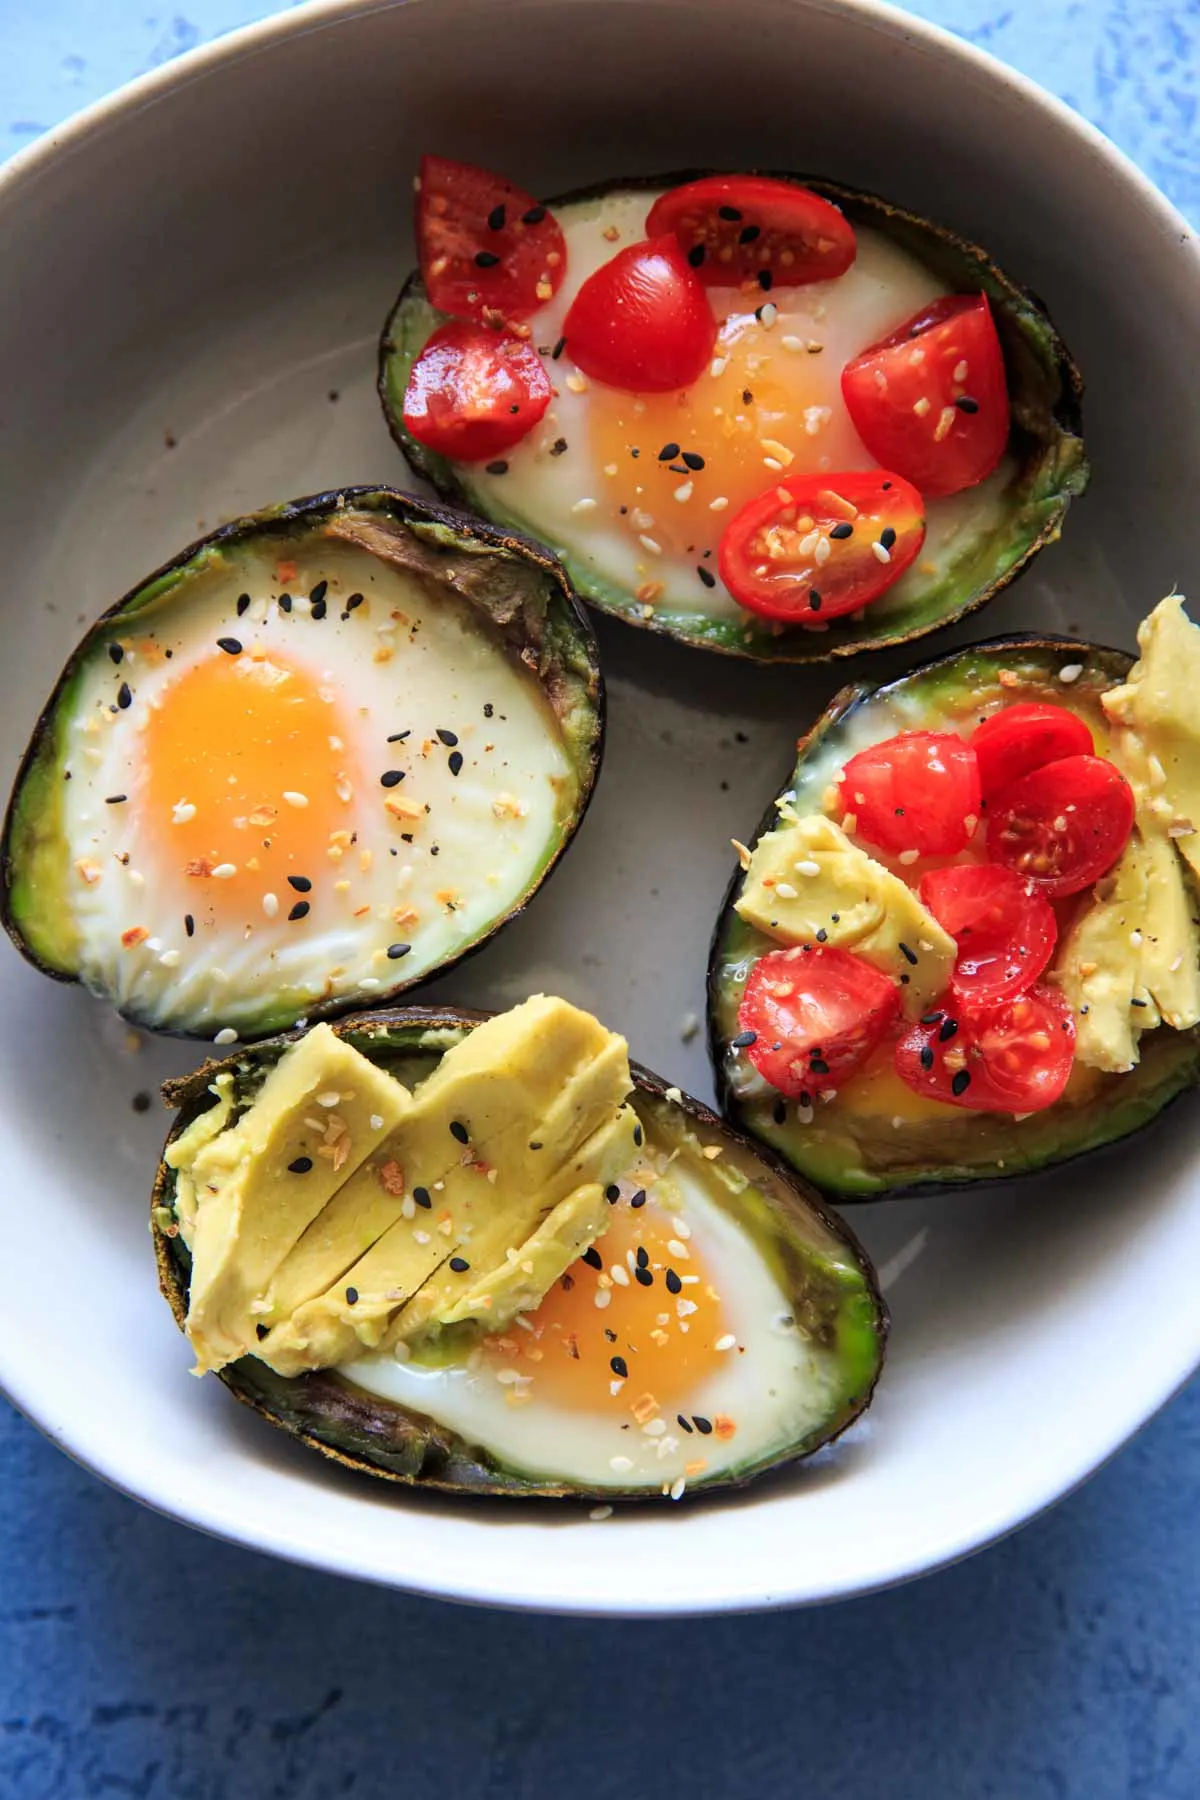 Baked Egg in Avocado's (Avocado "Nests") are a fun way to have a balanced snack or breakfast. Customizable with toppings and will last a day or two in the fridge, so you can bake ahead if needed! Low-carb, protein, fiber and healthy fats.